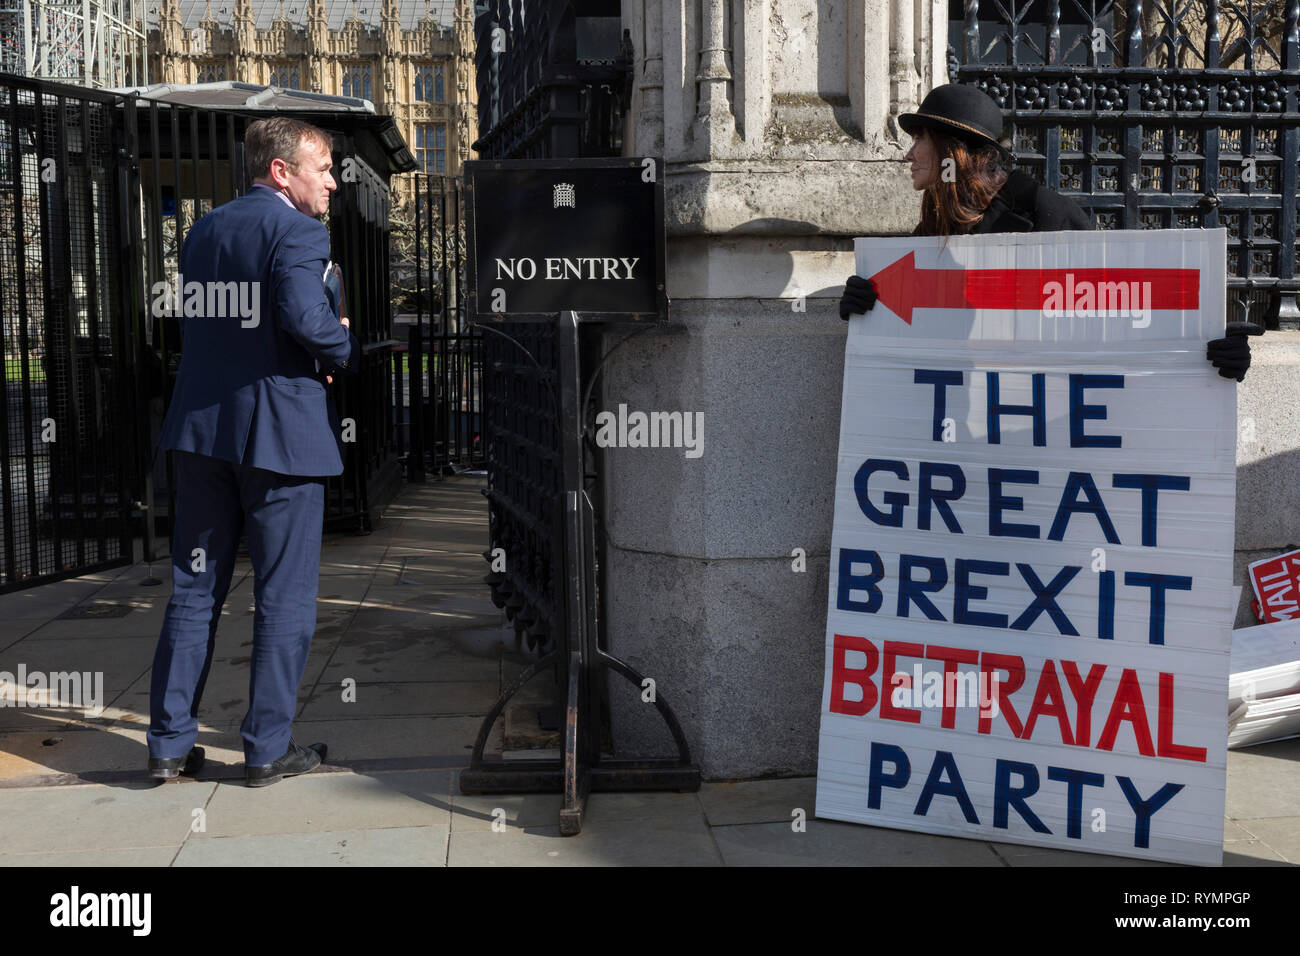 On the day that MPs in Parliament vote on a possible delay on Article 50 on EU Brexit negotiations by Prime Minister Theresa May, George Eustice, MP for Camborne, Redruth & Hayle, exchanges words with Brexiteer activists as they protest at the gates of the House of Commons, on 14th March 2019, in Westminster, London, England. Stock Photo